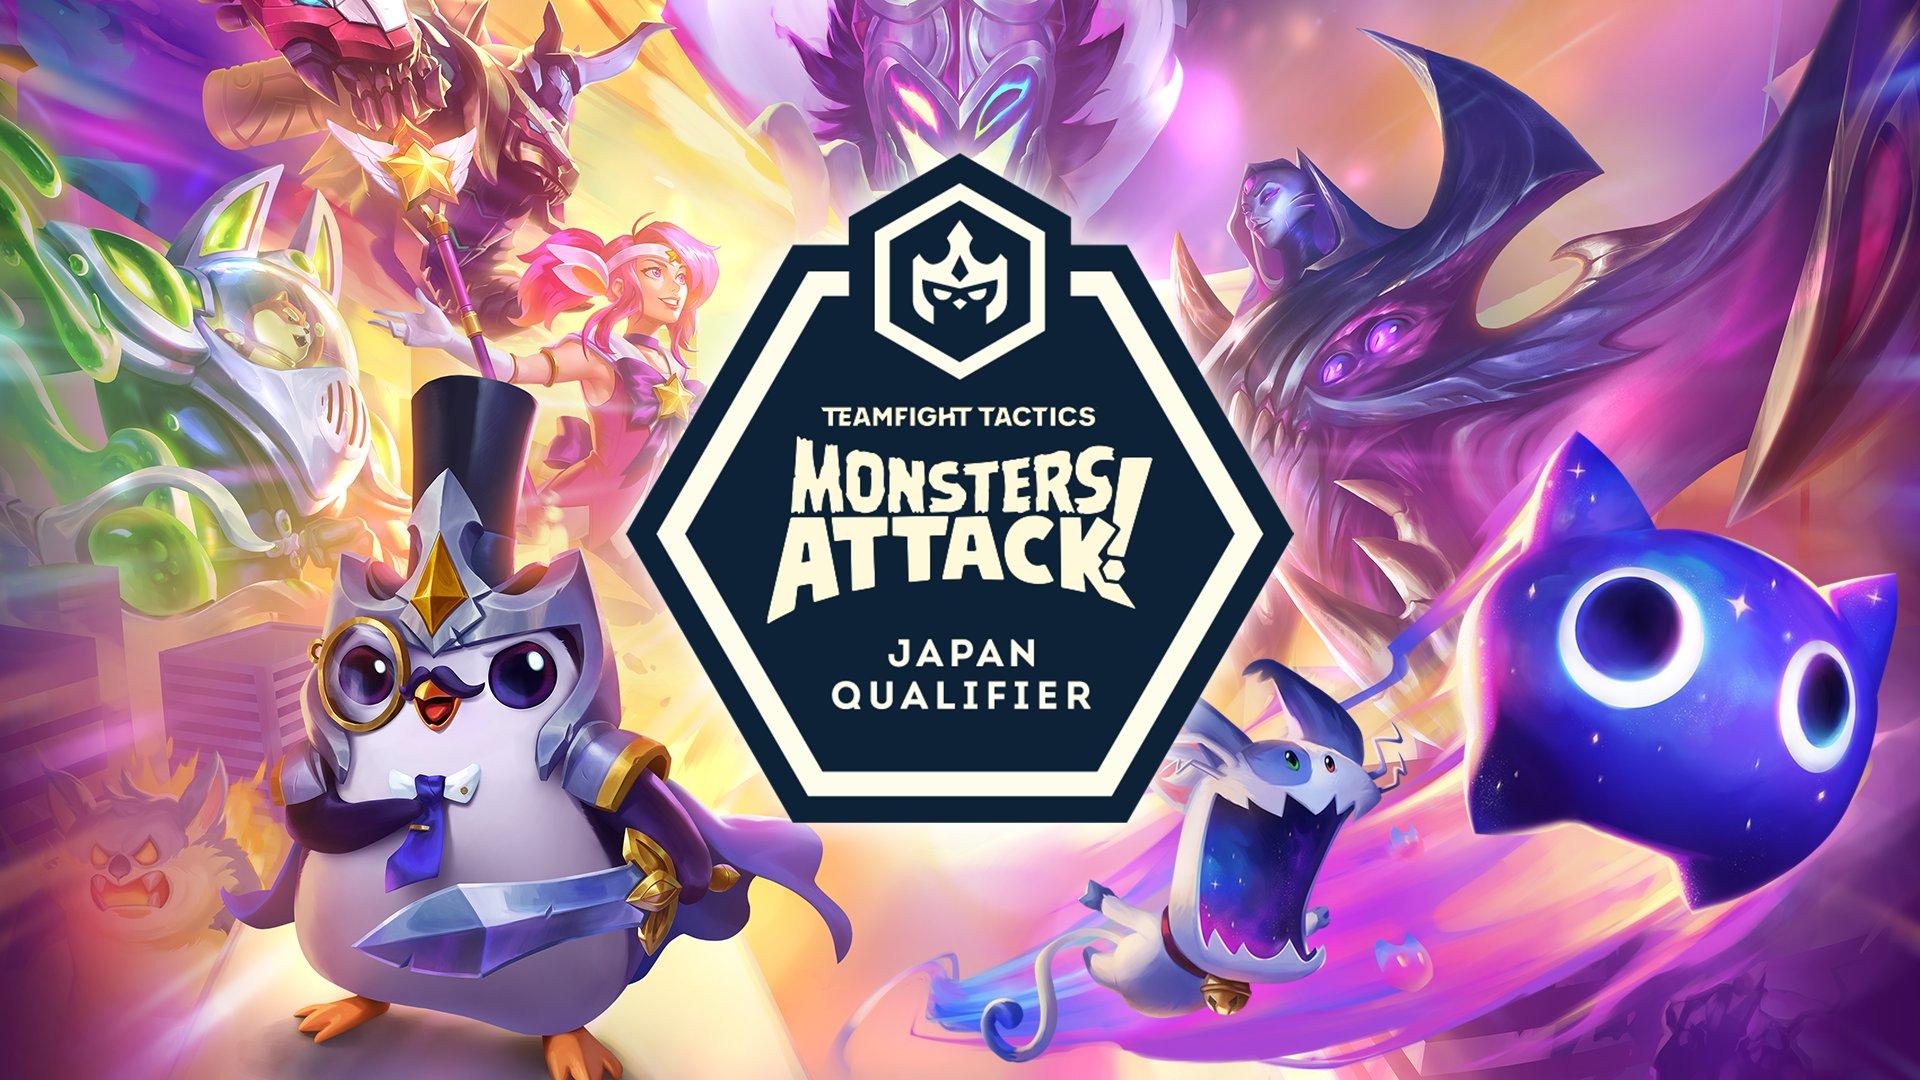 TFT Monsters Attack! Japan Qualifierの見出し画像